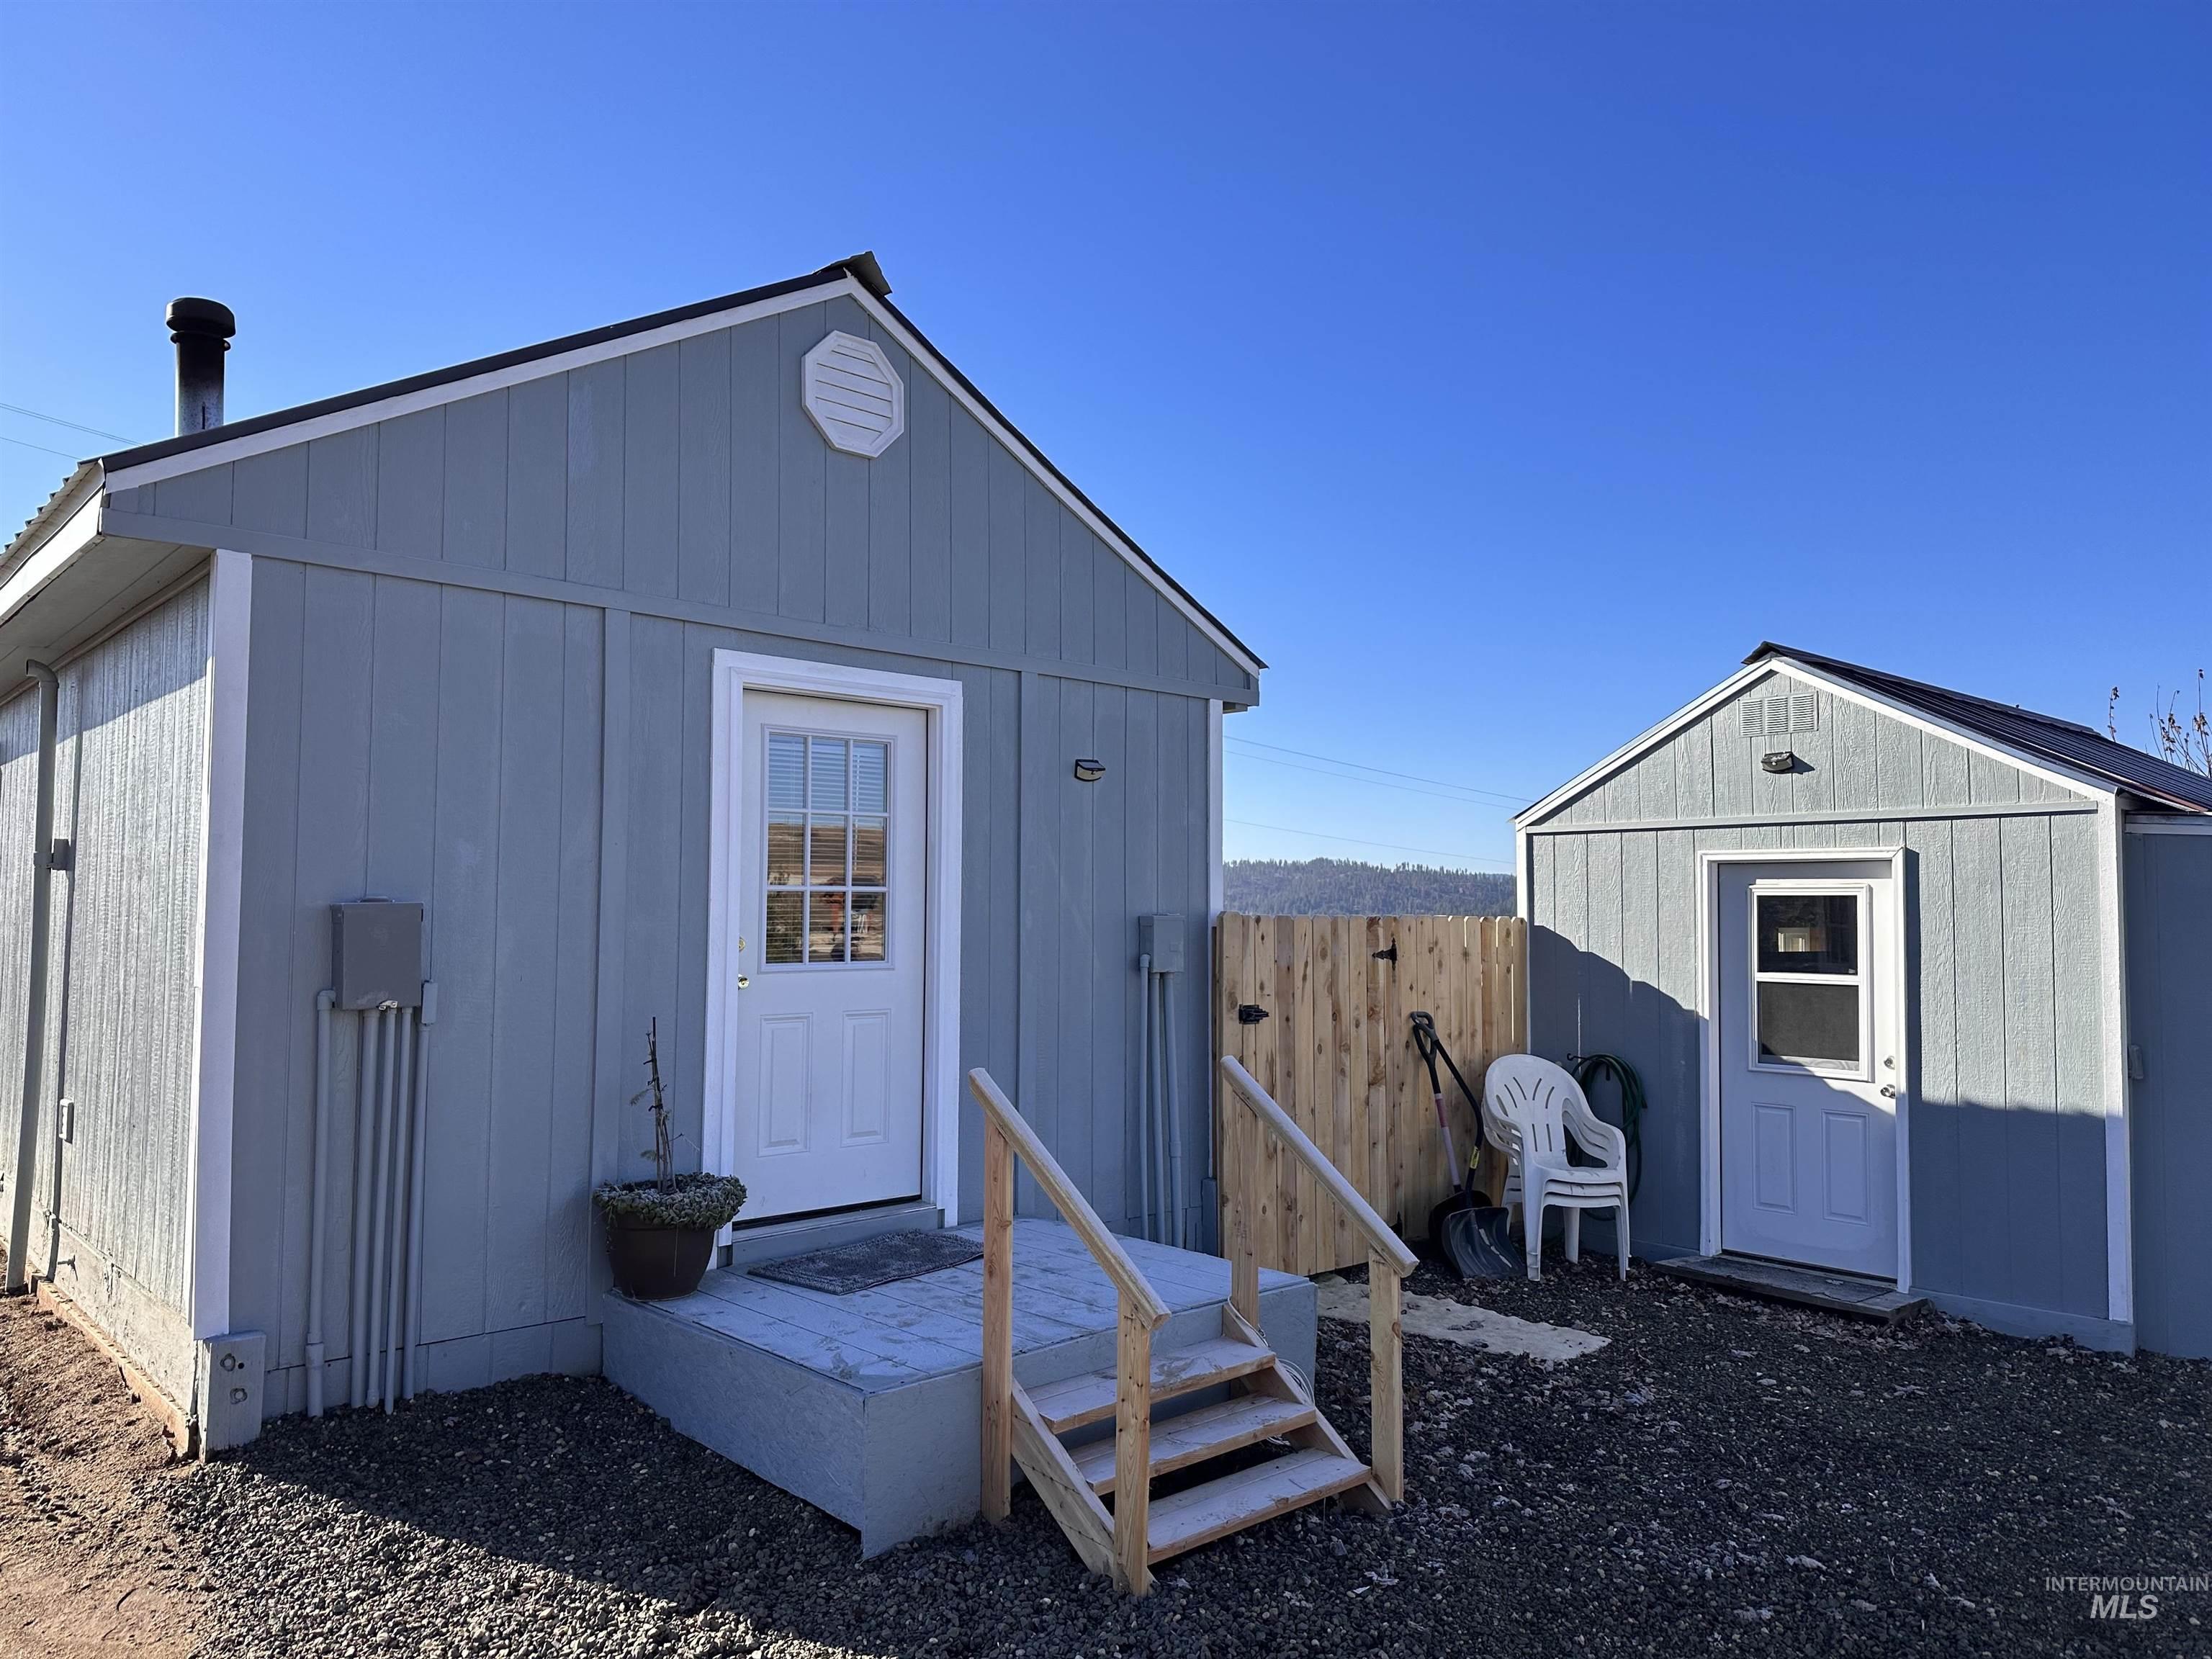 10280 Gamann Dr., Cascade, Idaho 83611, Residential For Sale, Price $190,000,MLS 98891303